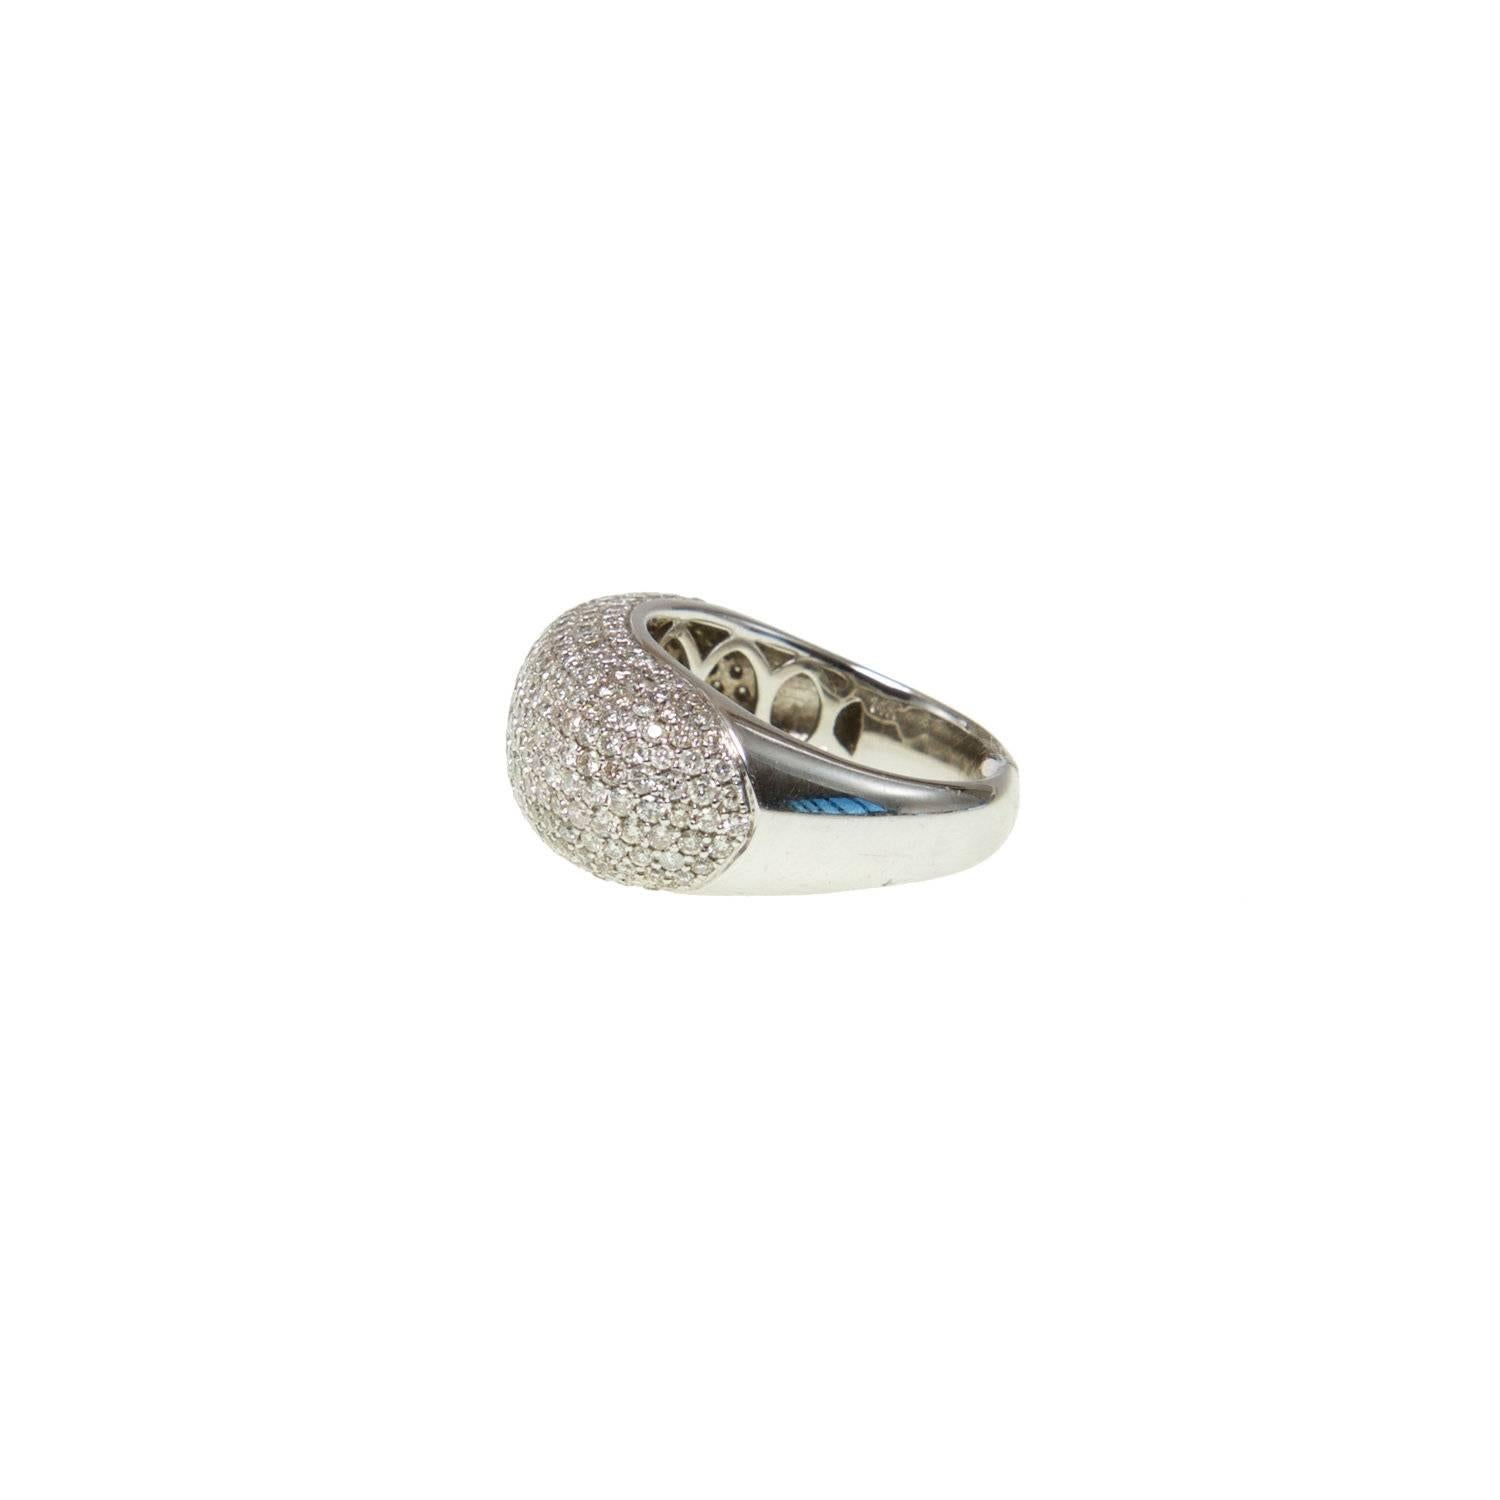 A modern twist on a timeless and classic piece of jewelry, Ri Noor's Diamond Bar Cocktail Ring shimmers in the light creating a dazzling presence on the wearer's finger. The rounded bar ring is covered with brilliant round diamonds in 14k white